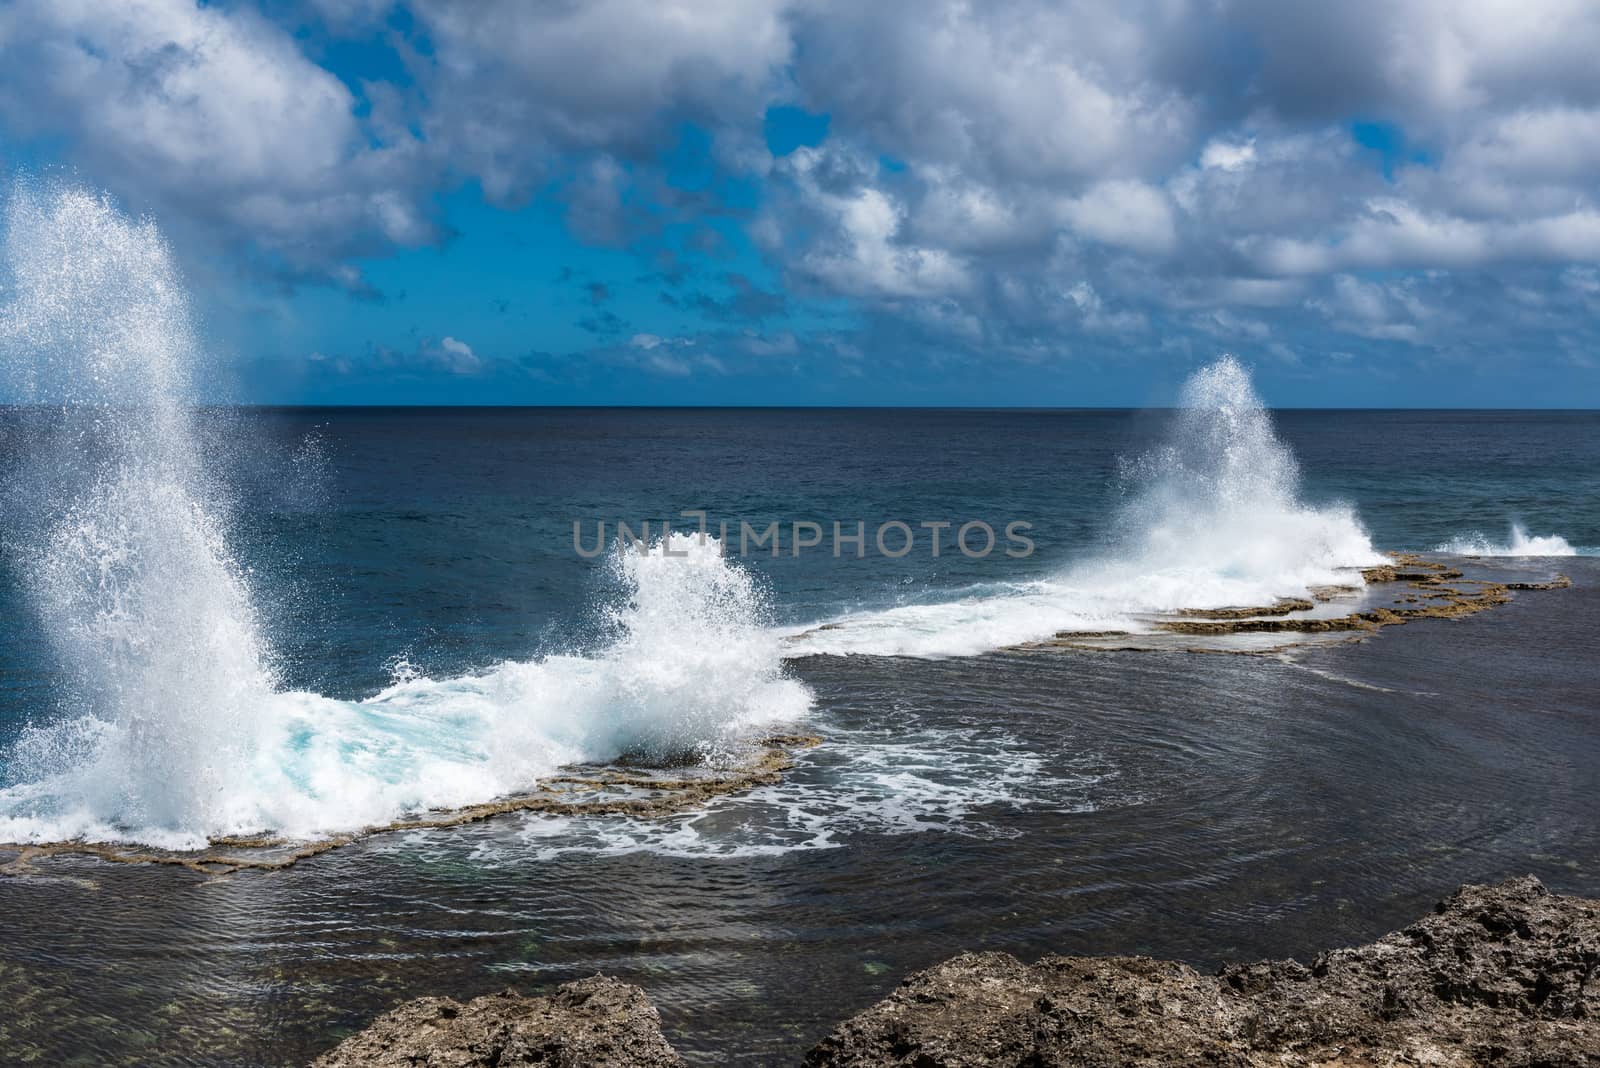 Water shoots to the sky from blowholes on the coastline of Alofa in Tonga as the tide rolls in.